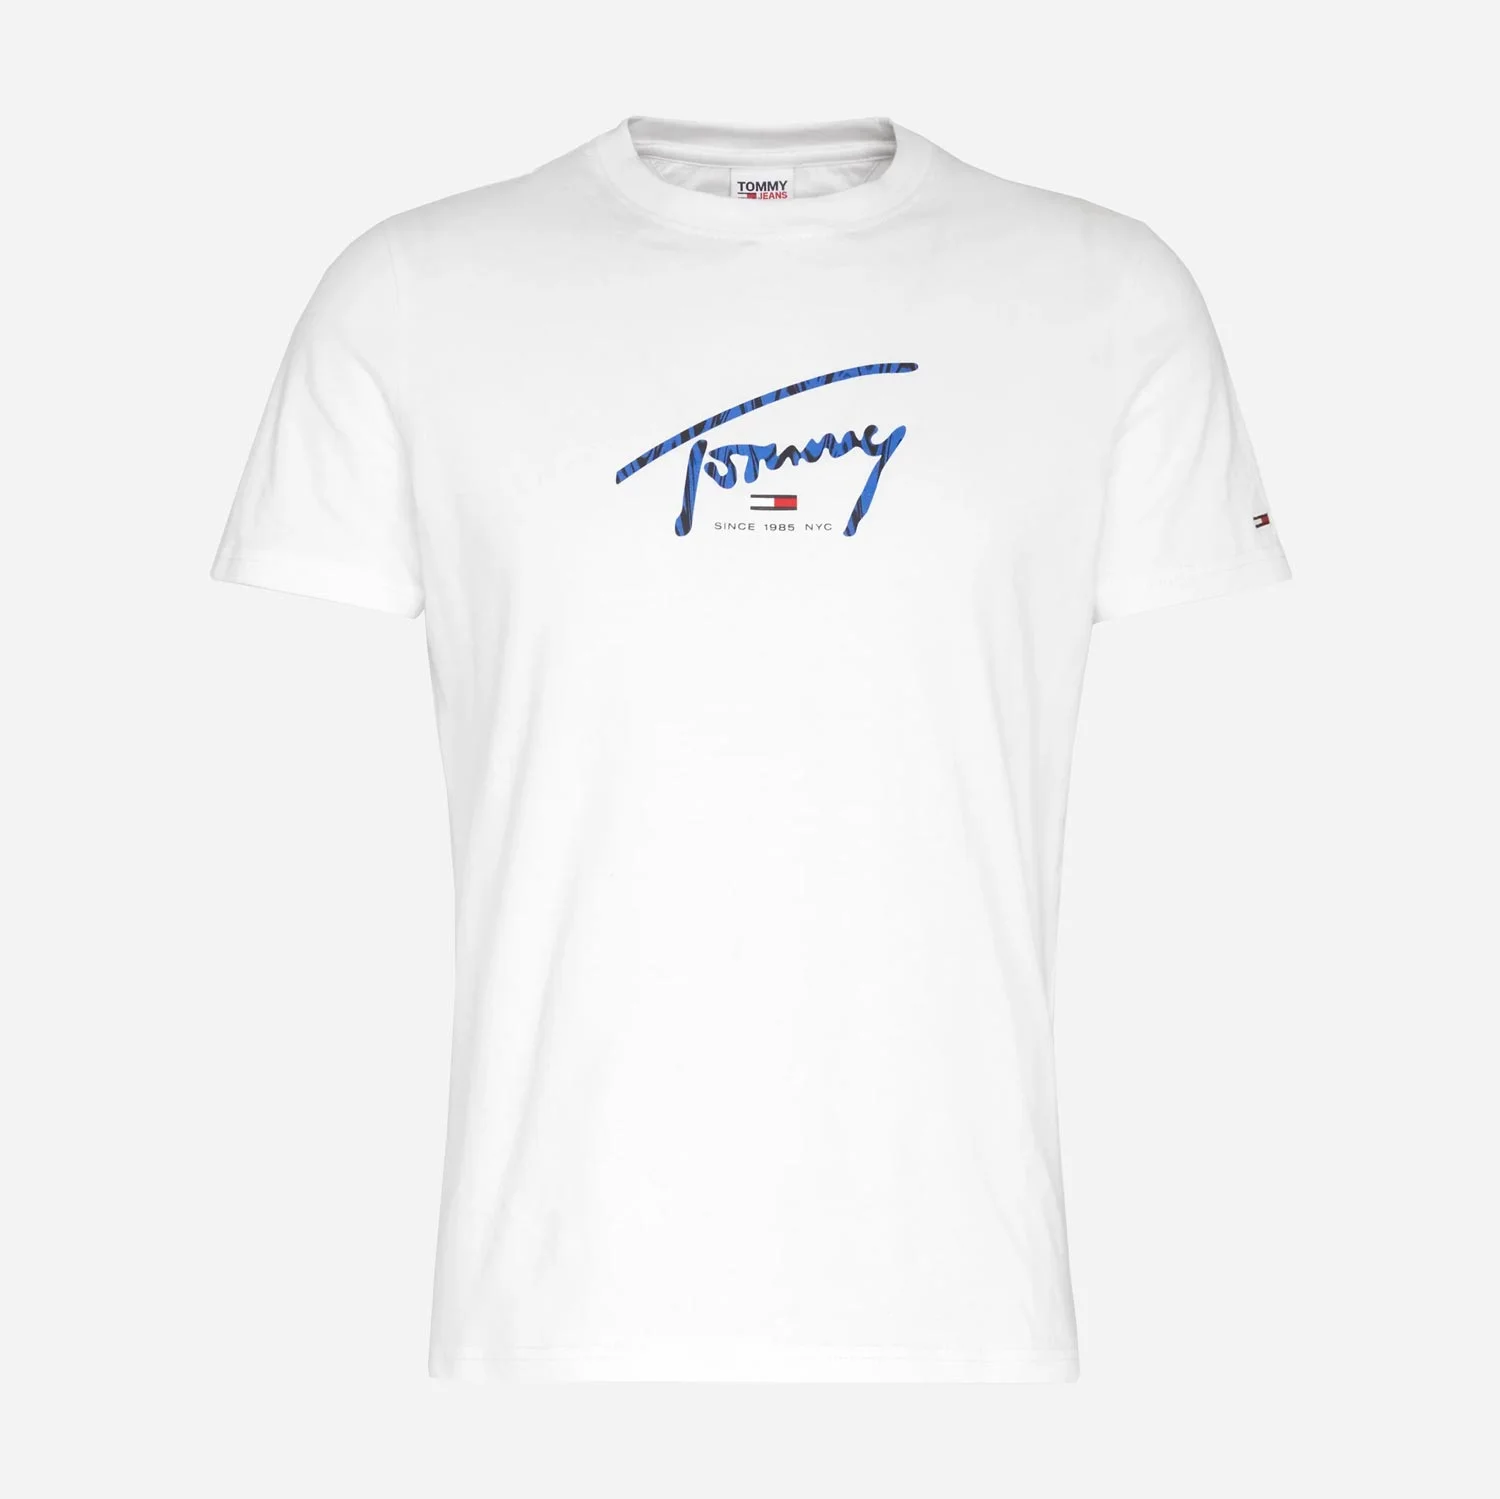 Tommy Jeans | The Cream Store